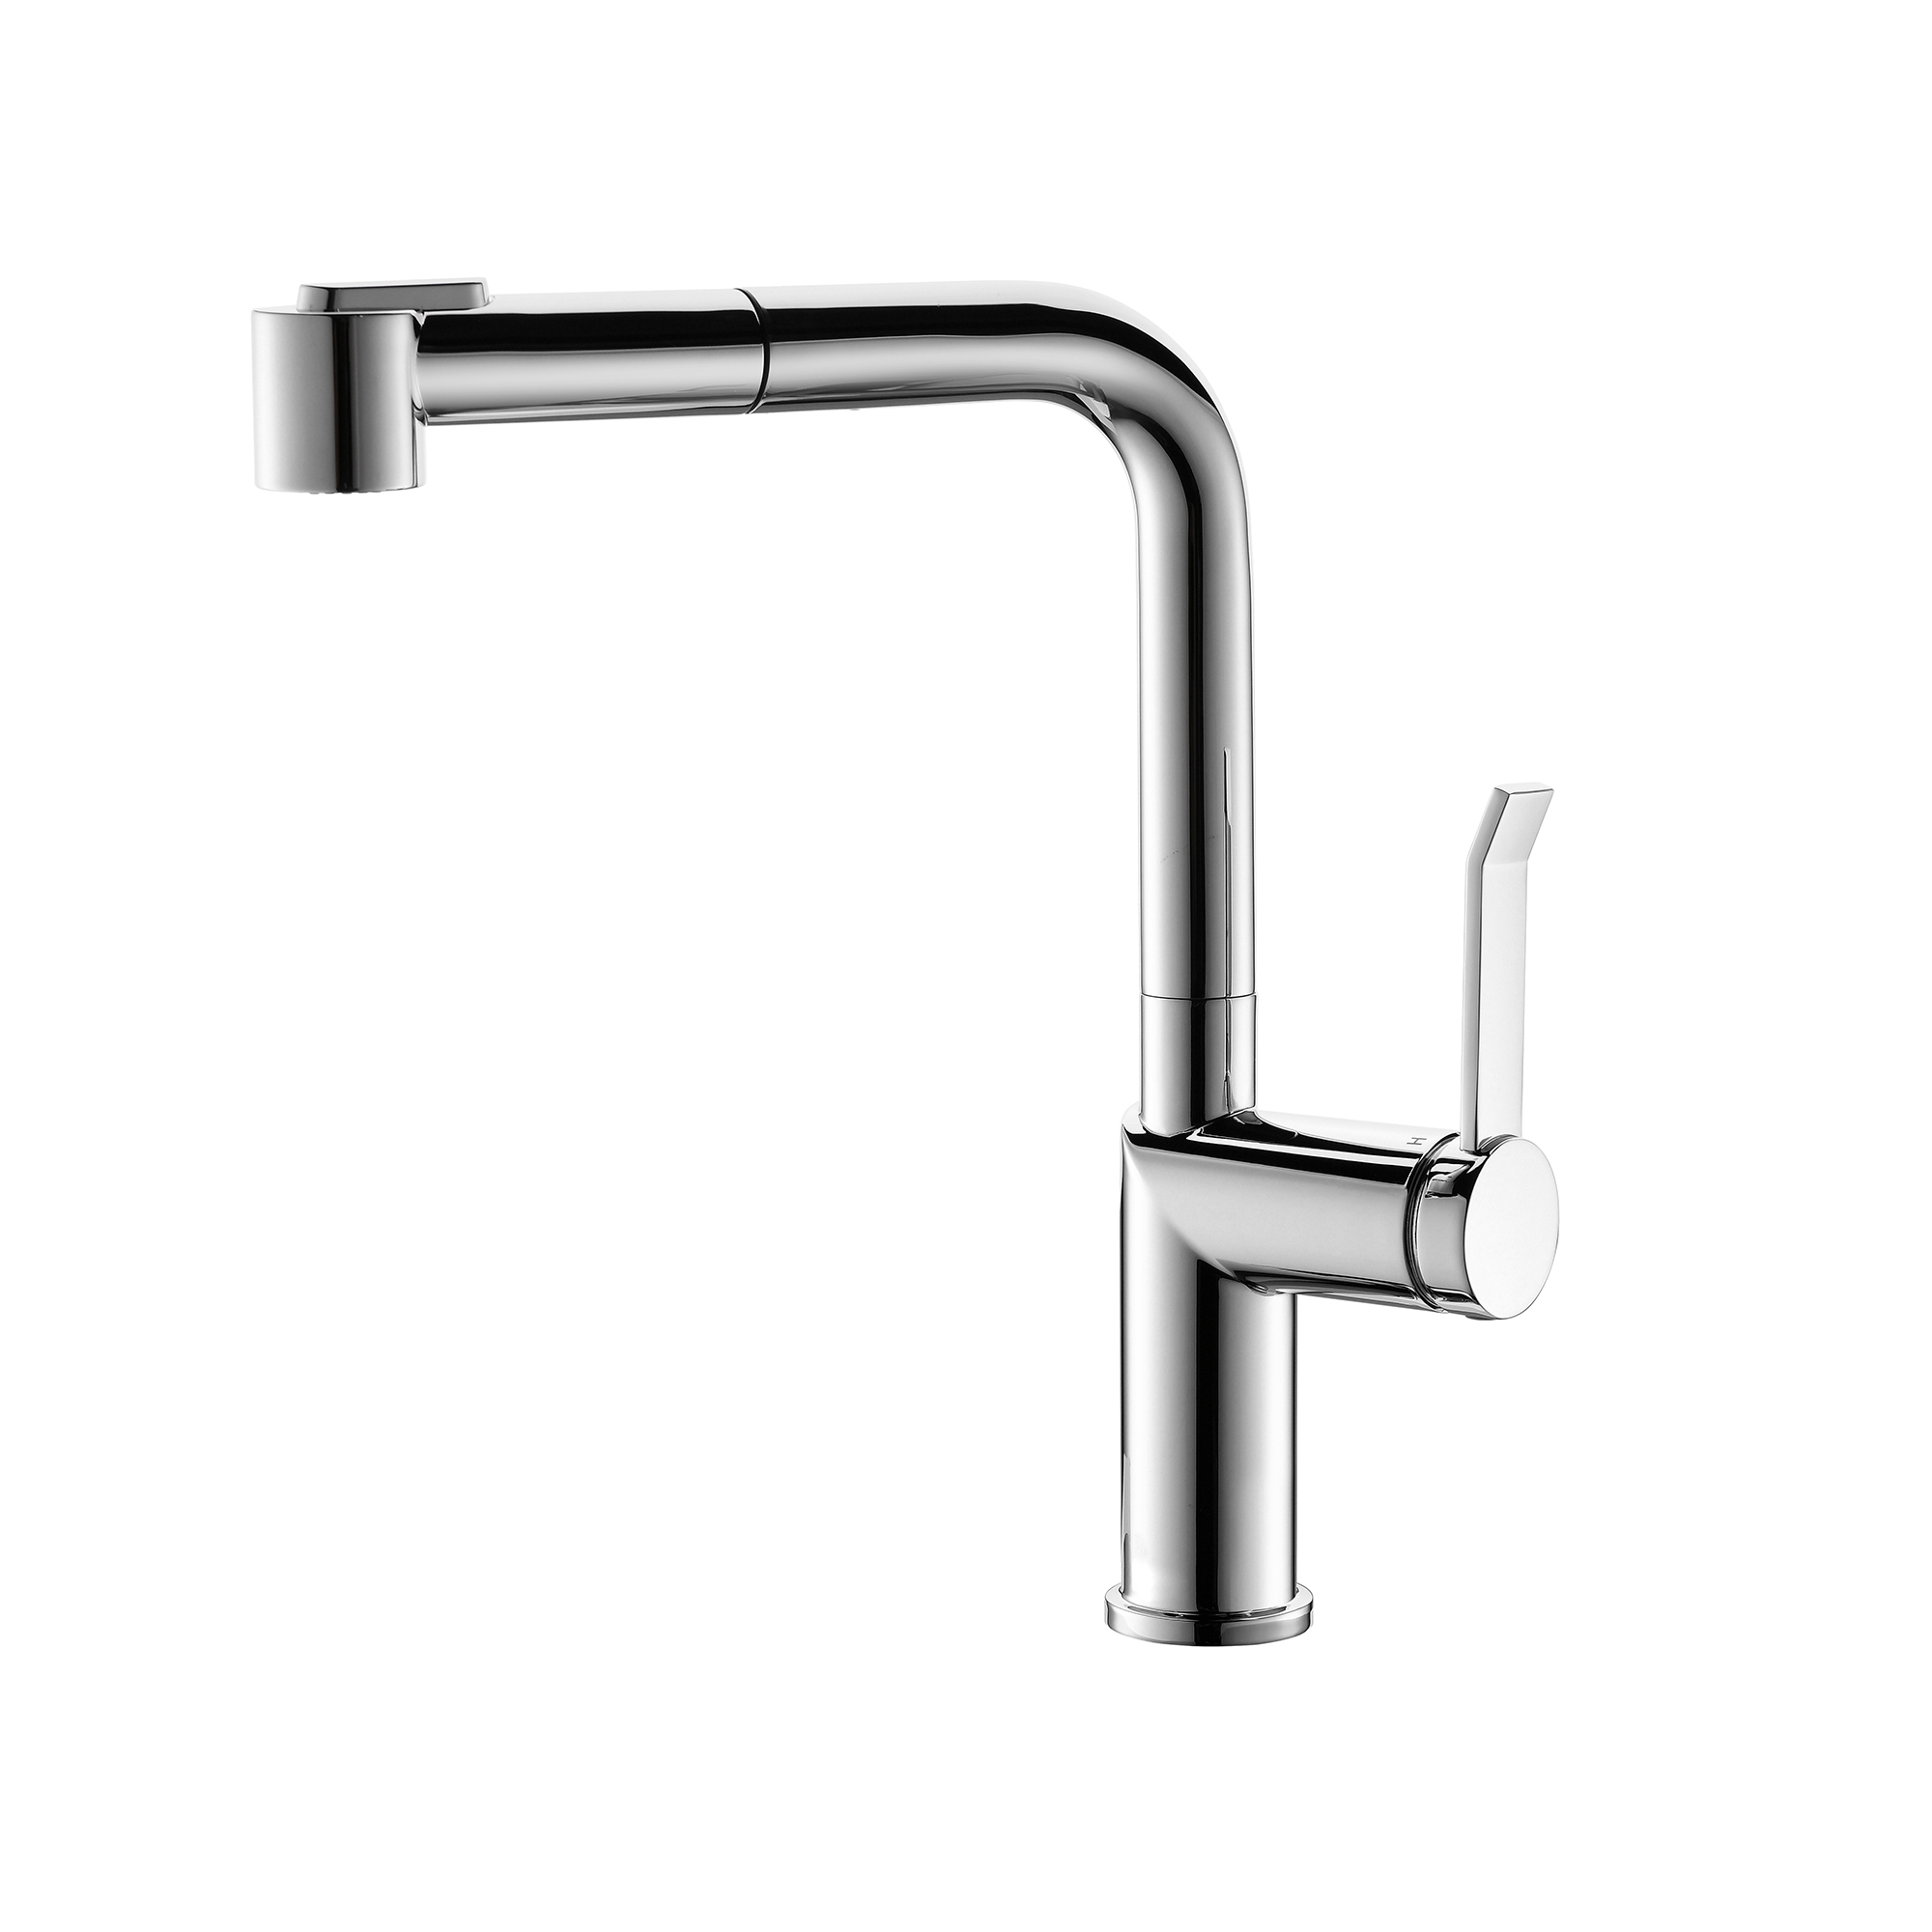 Modern Style Chrome Pull-Out Kitchen Faucet